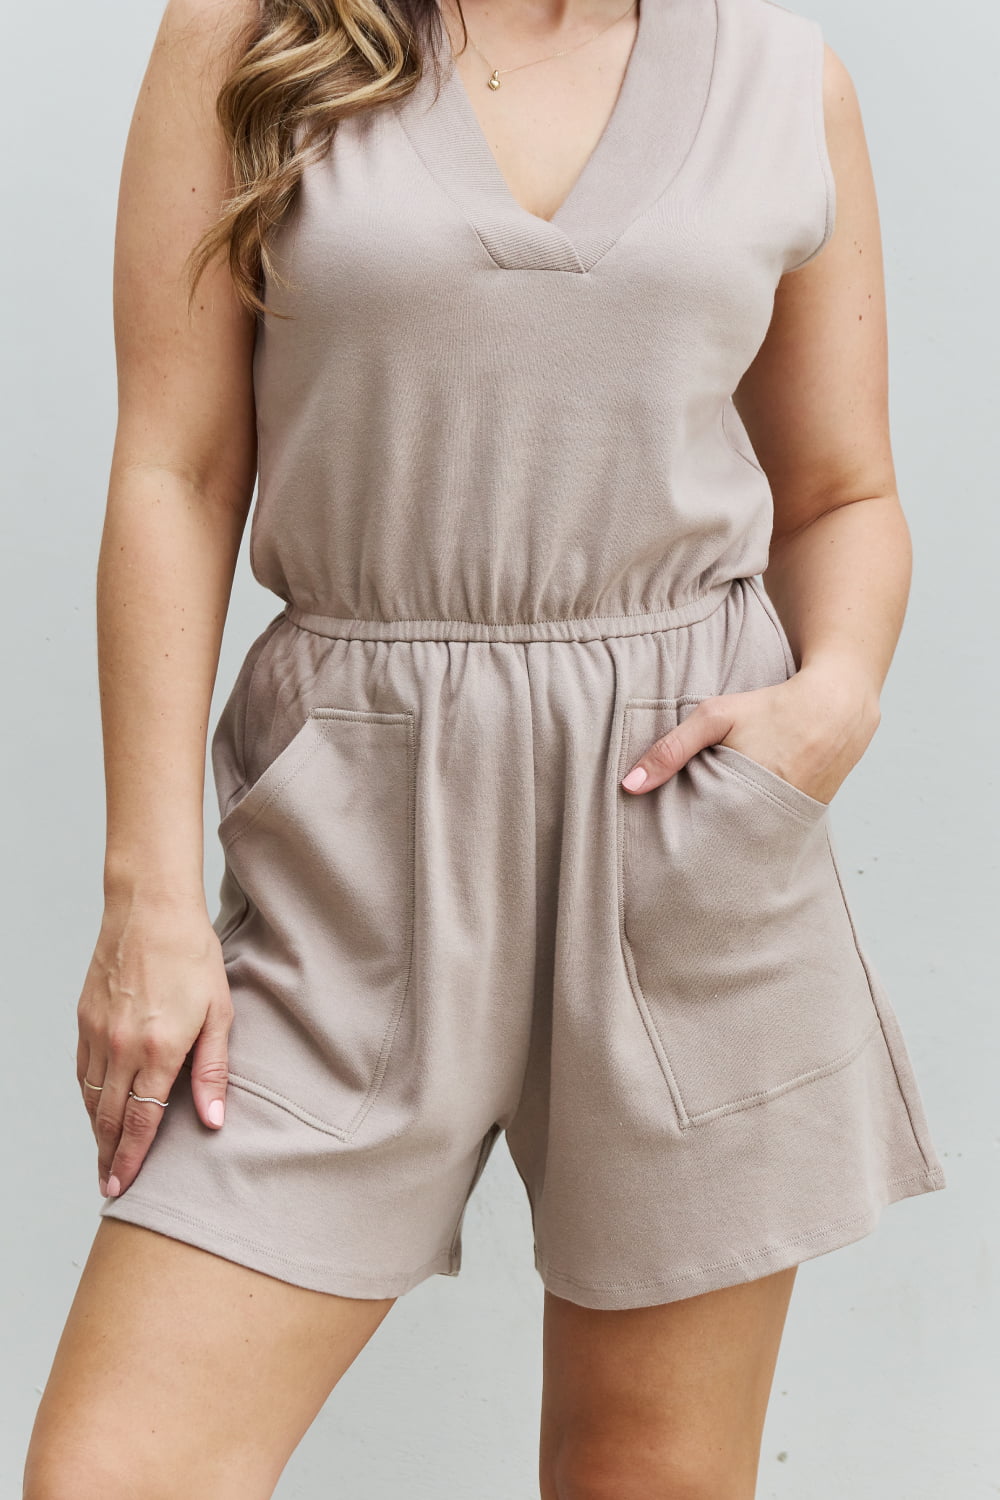 - Zenana Forever Yours Full Size V-Neck Sleeveless Romper in Sand - Ships from The USA - womens romper at TFC&H Co.